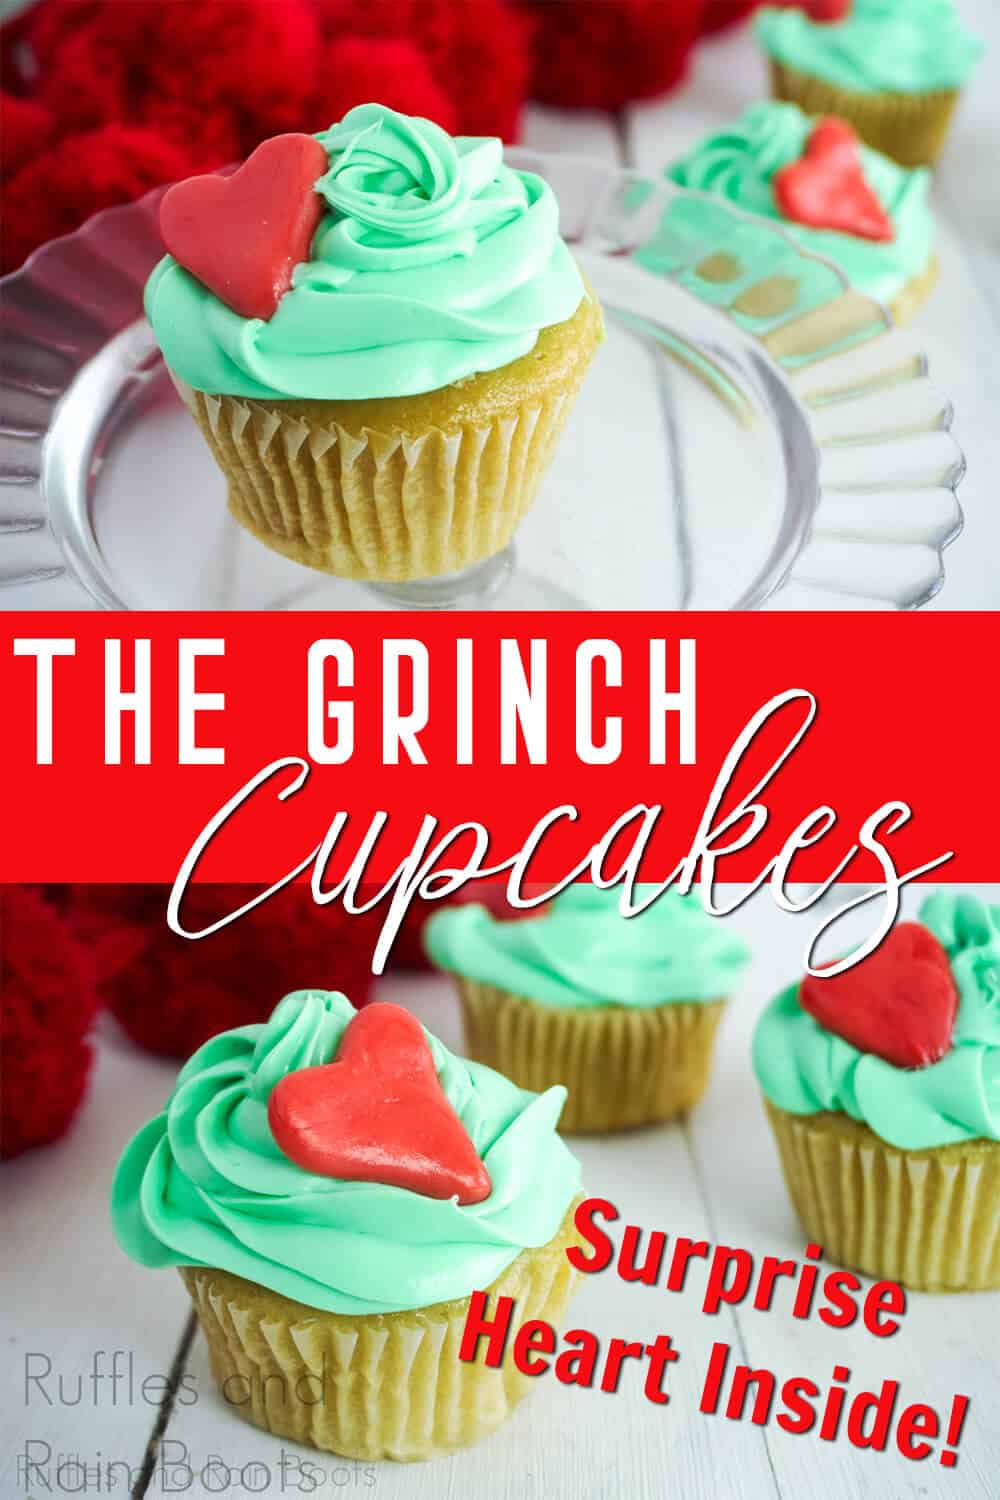 photo collage of grinch cupcakes for a grinch movie night with text which reads The Grinch Cupcakes Surprise Heart Inside